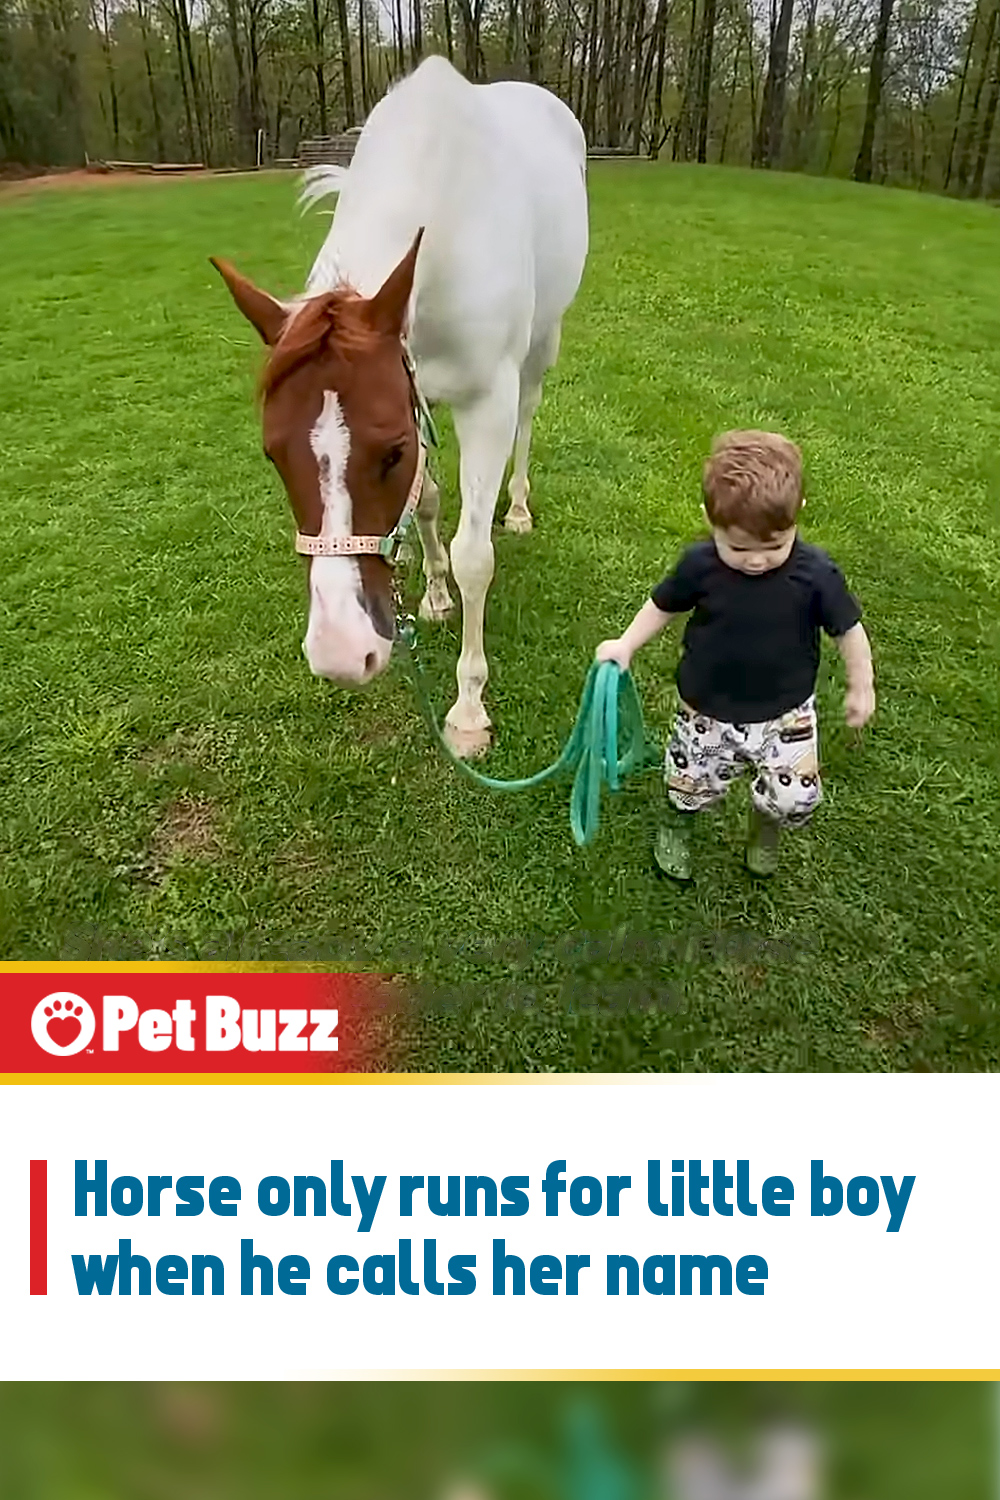 Horse only runs for little boy when he calls her name